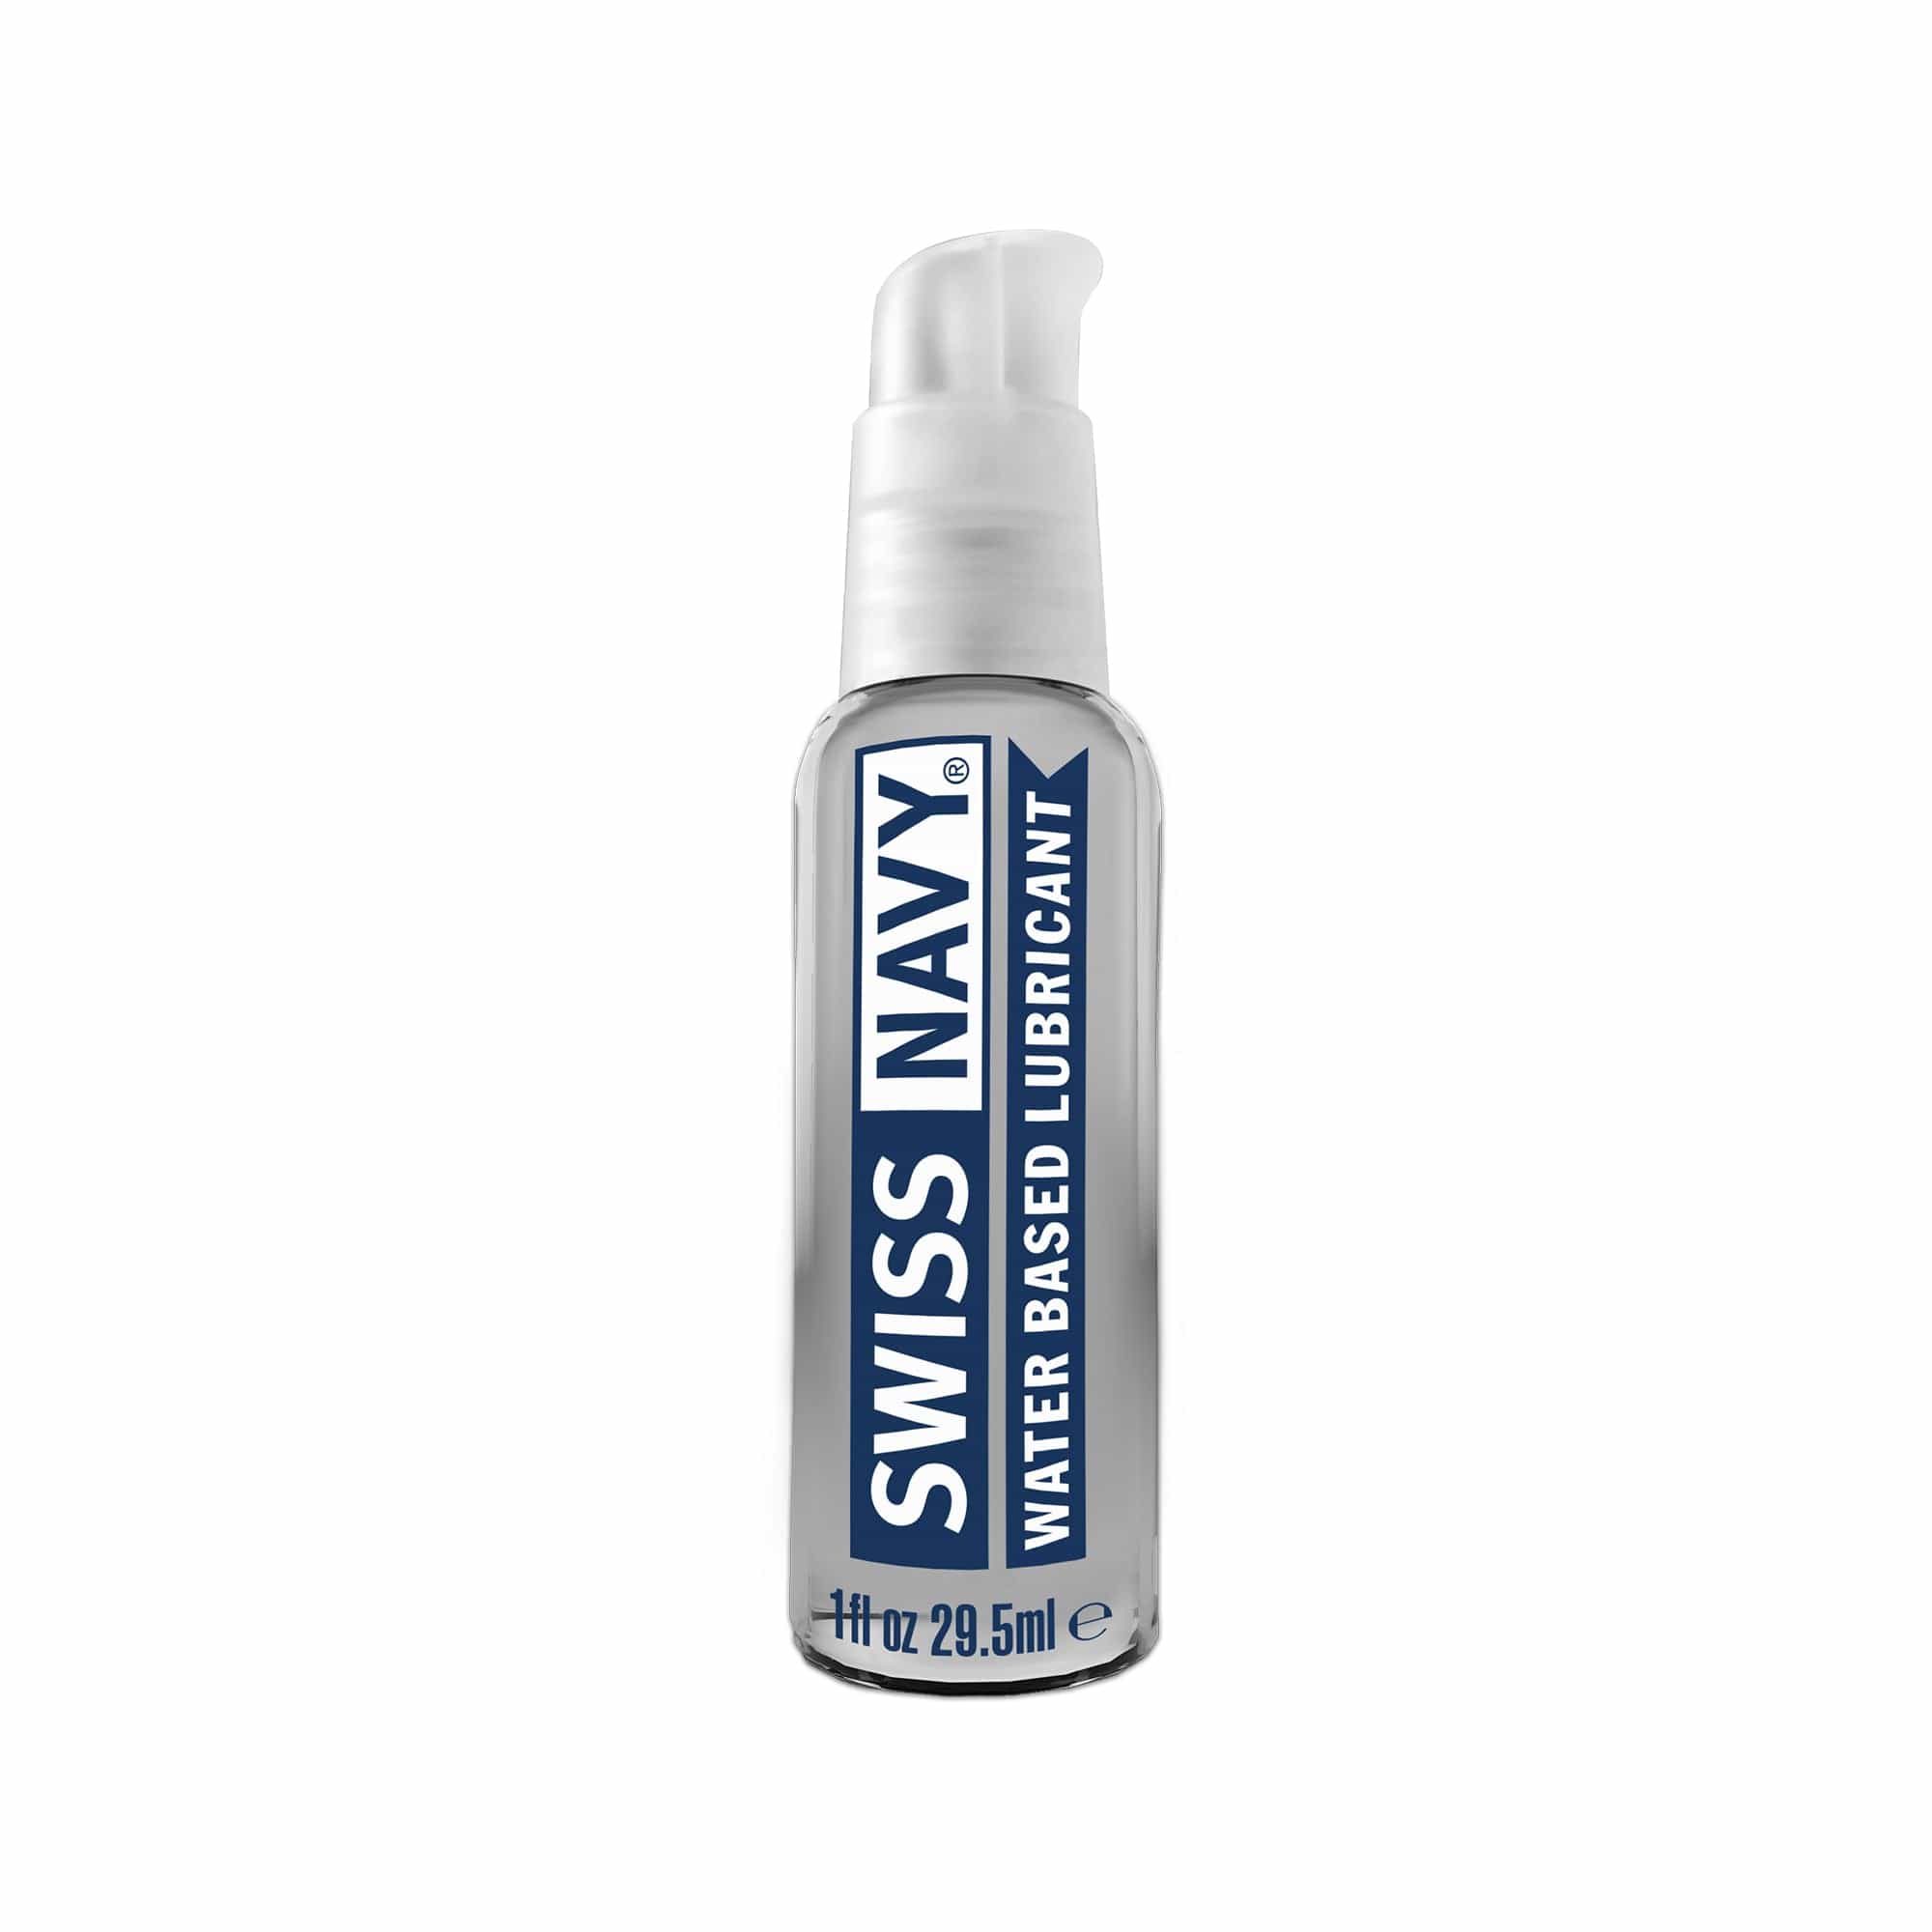 Swiss Navy Lotions & Potions Swiss Navy Water Based Lubricant 1oz/29ml 699439004170